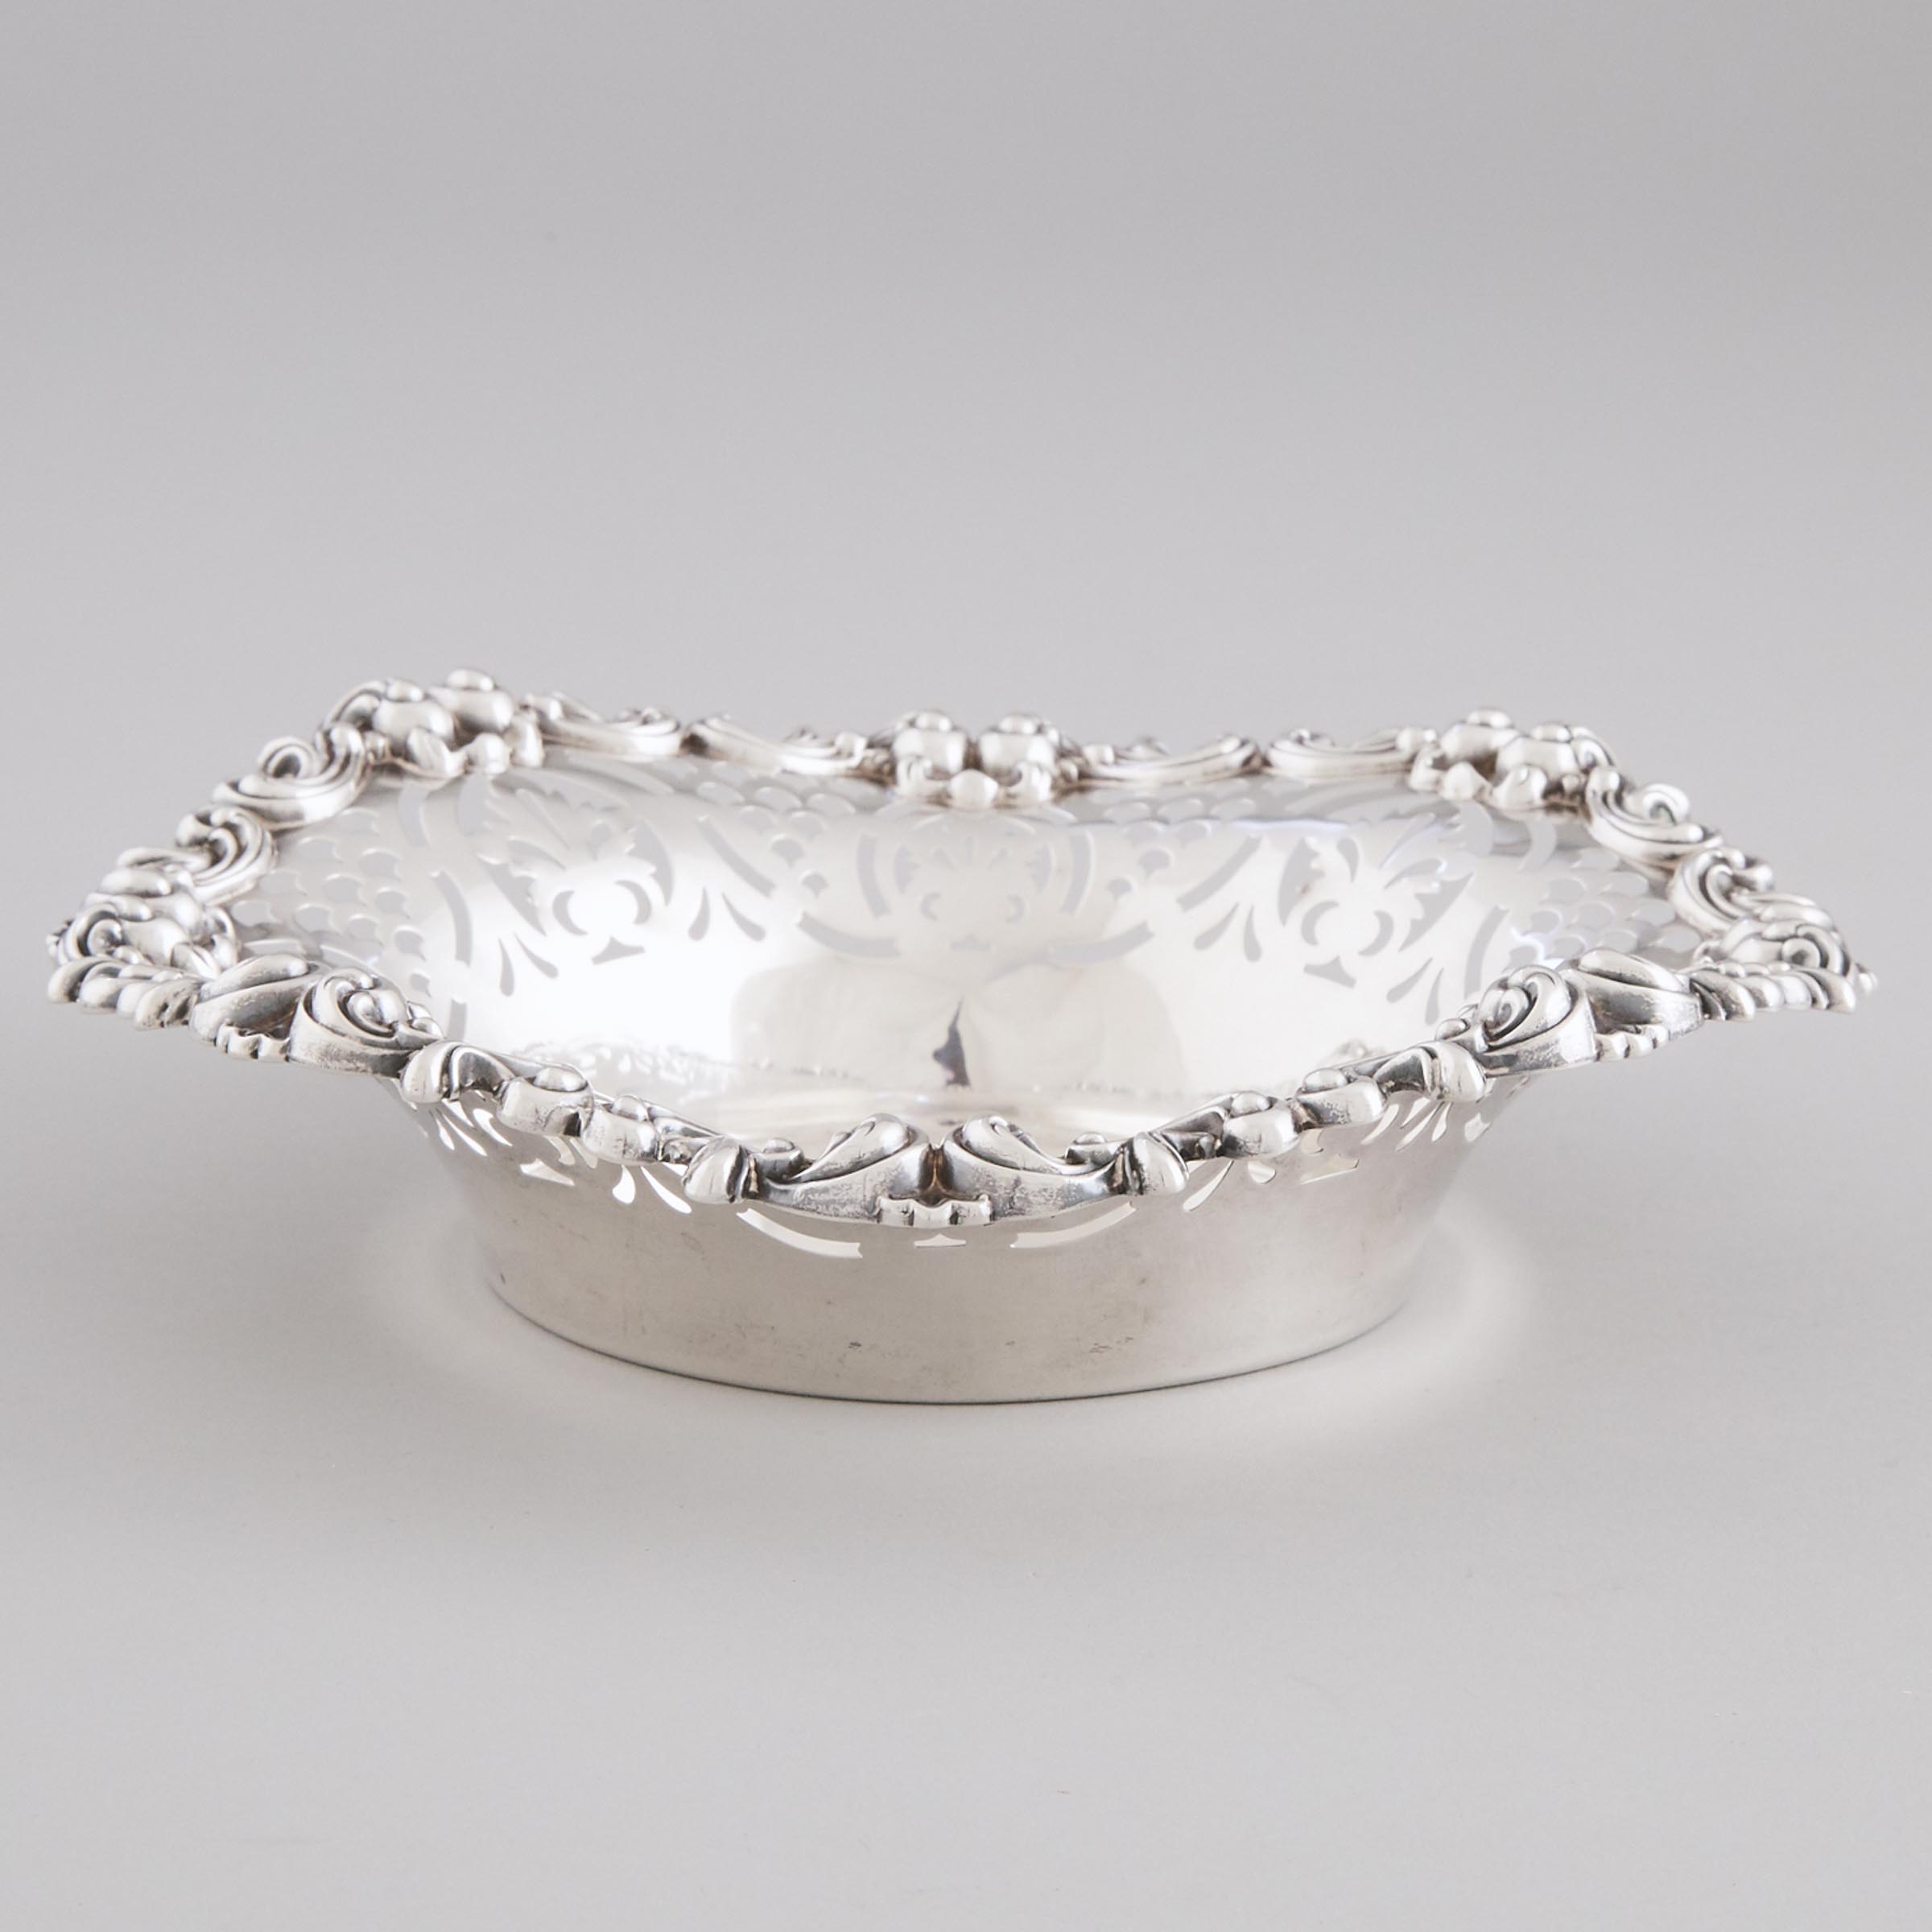 American Silver Pierced and Moulded Circular Dish, 20th century